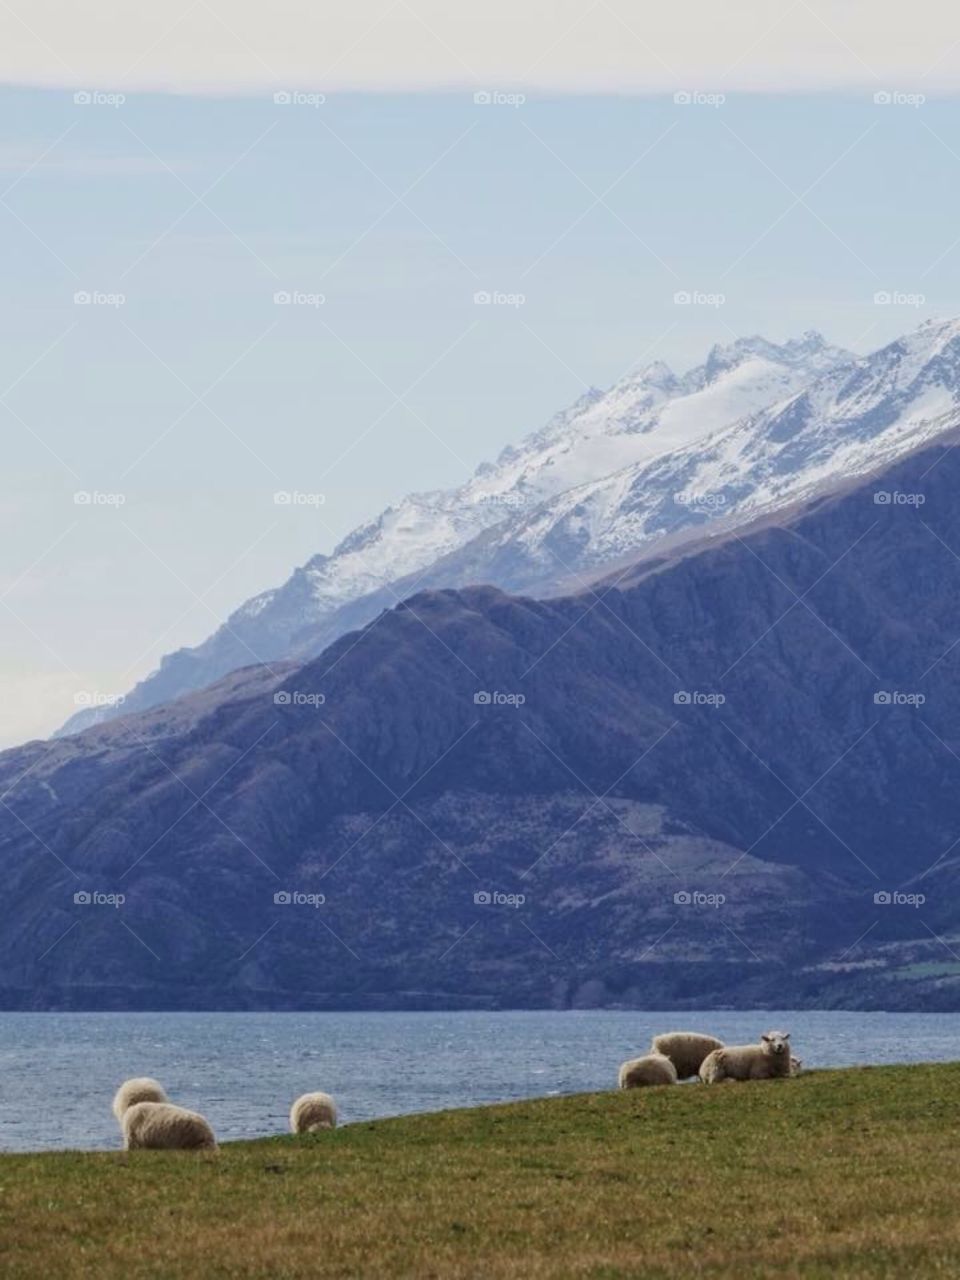 Sheep taking in the view